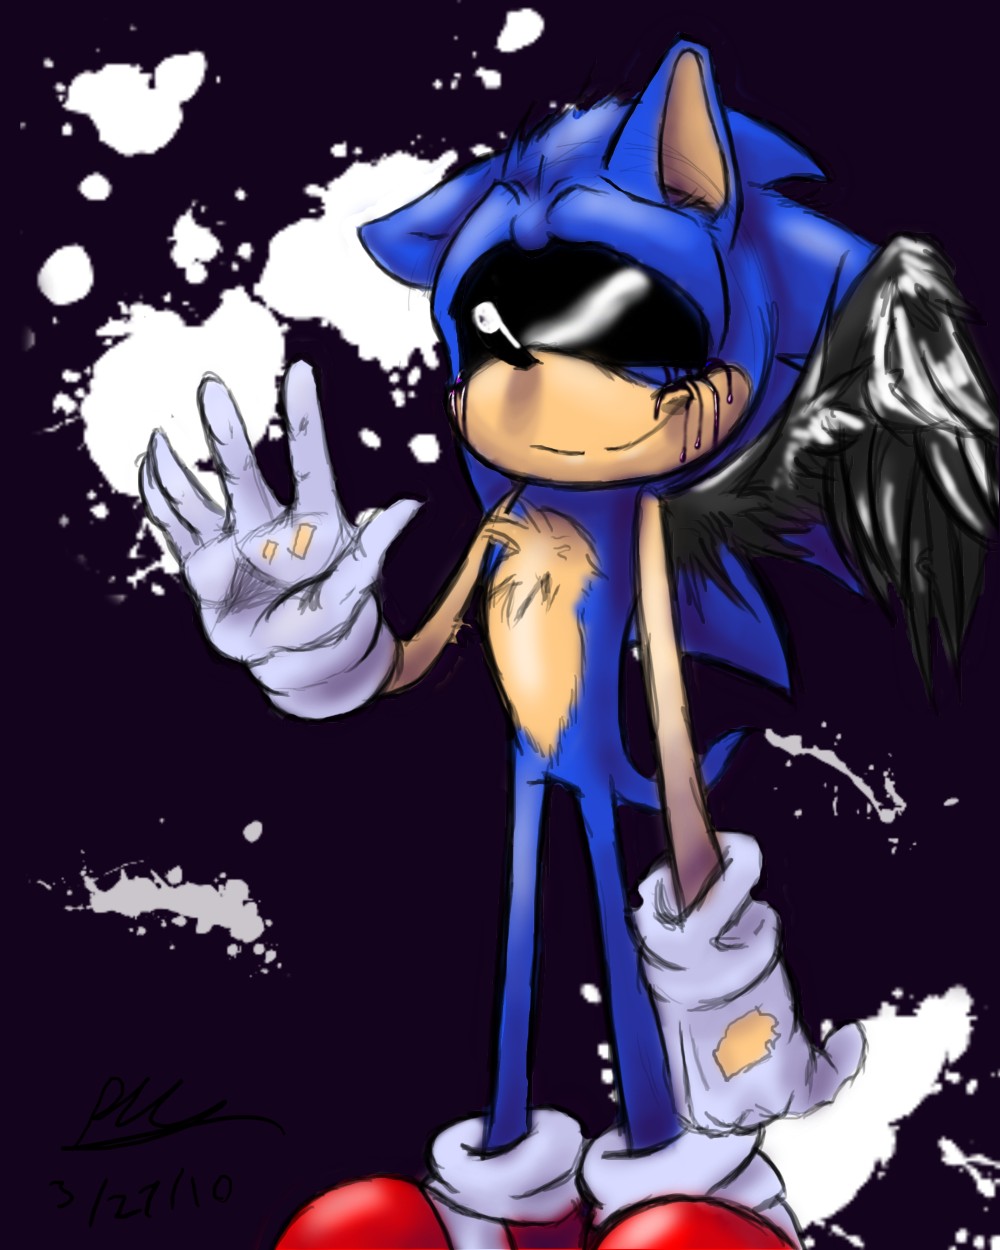 Fallen Angel Sonic Says Hi by TheGameArtCritic